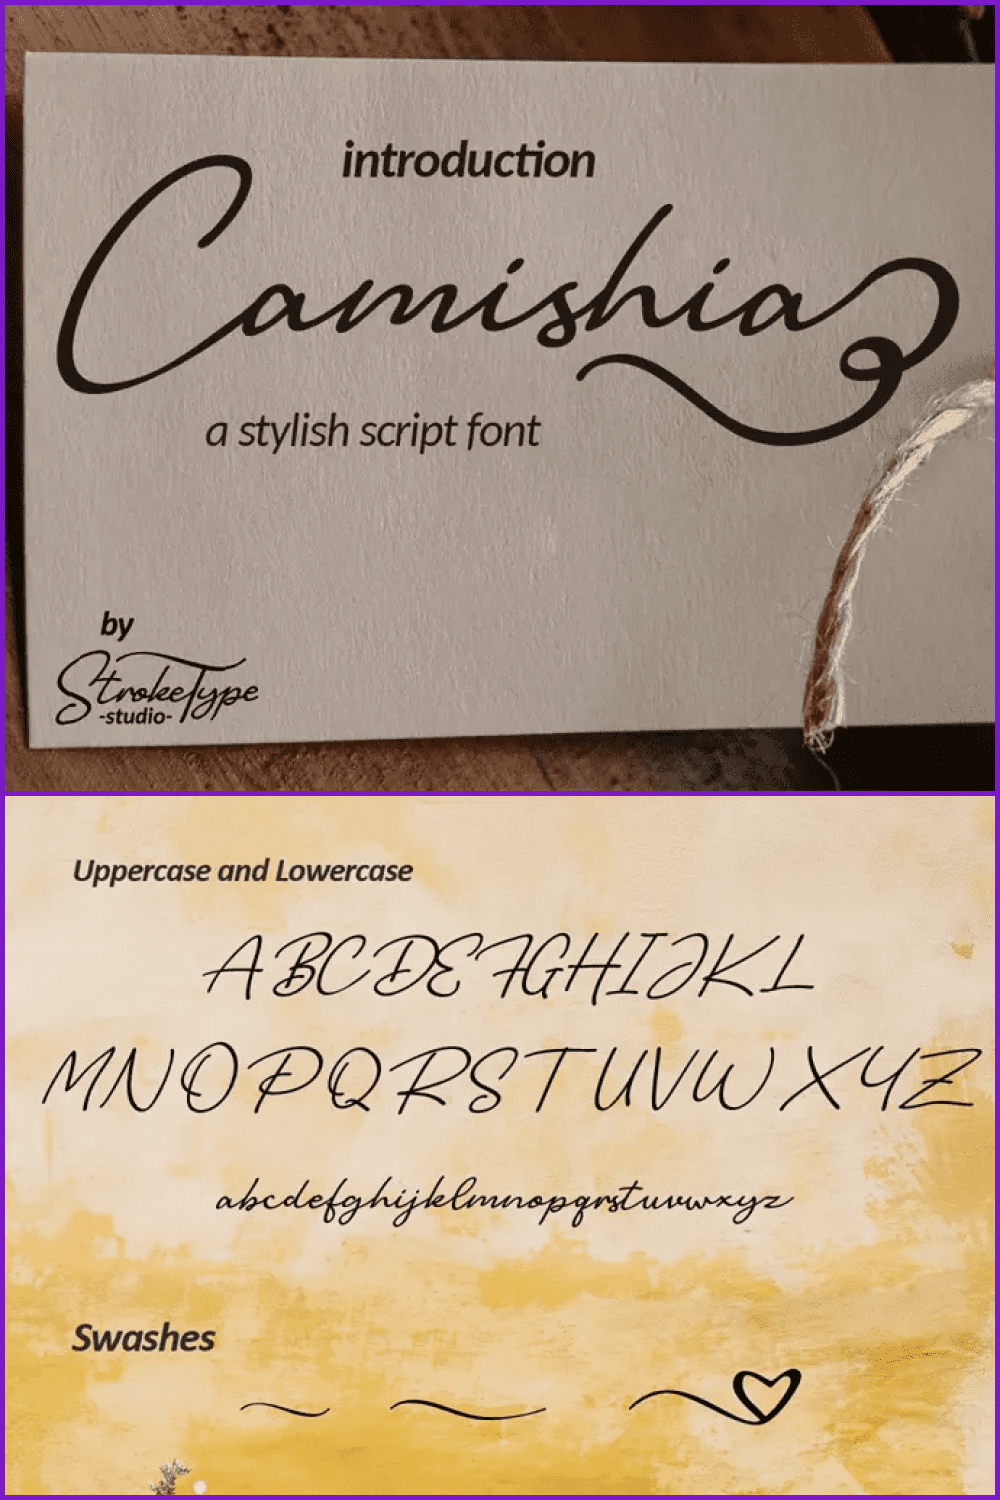 An example of a font for a signature on a postcard.